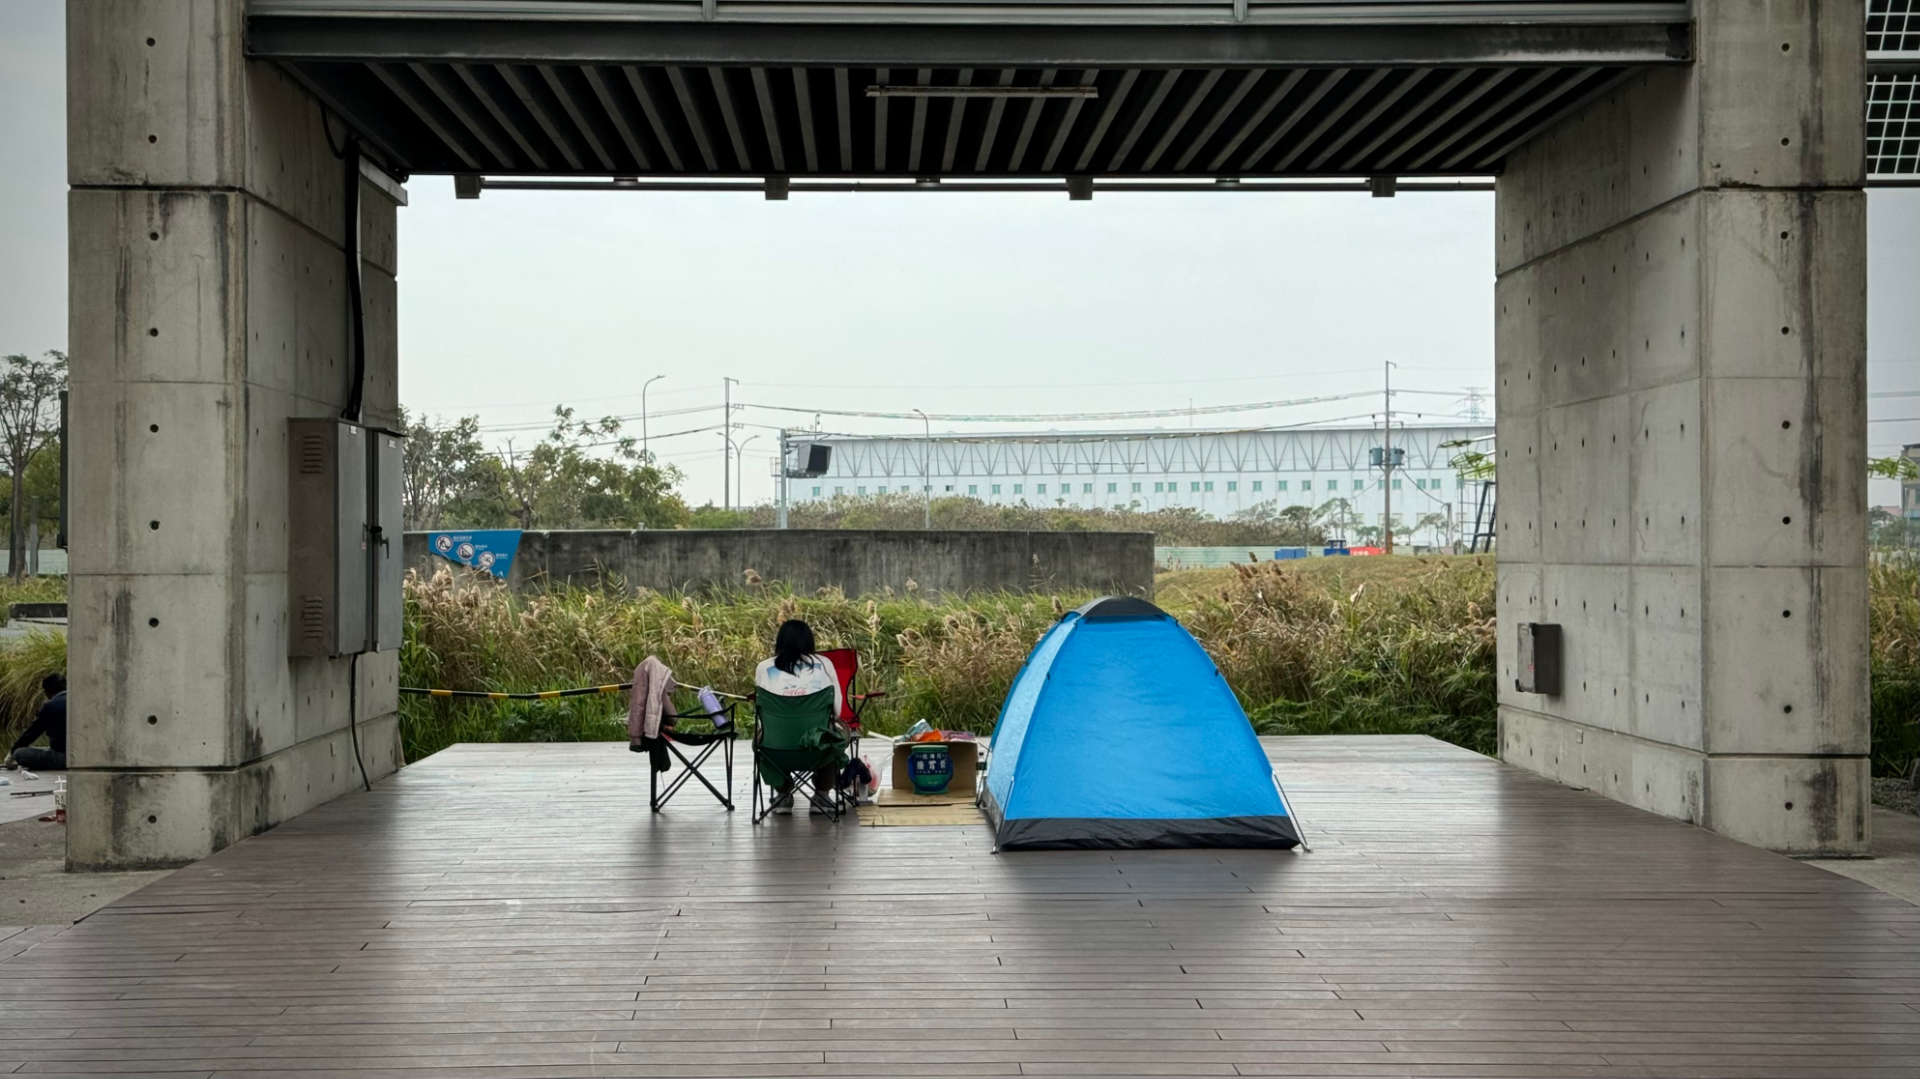 A lady in a camping chair, back to the camera, next to a small dome tent pitched under a solar array outside the National Museum of Taiwan History.